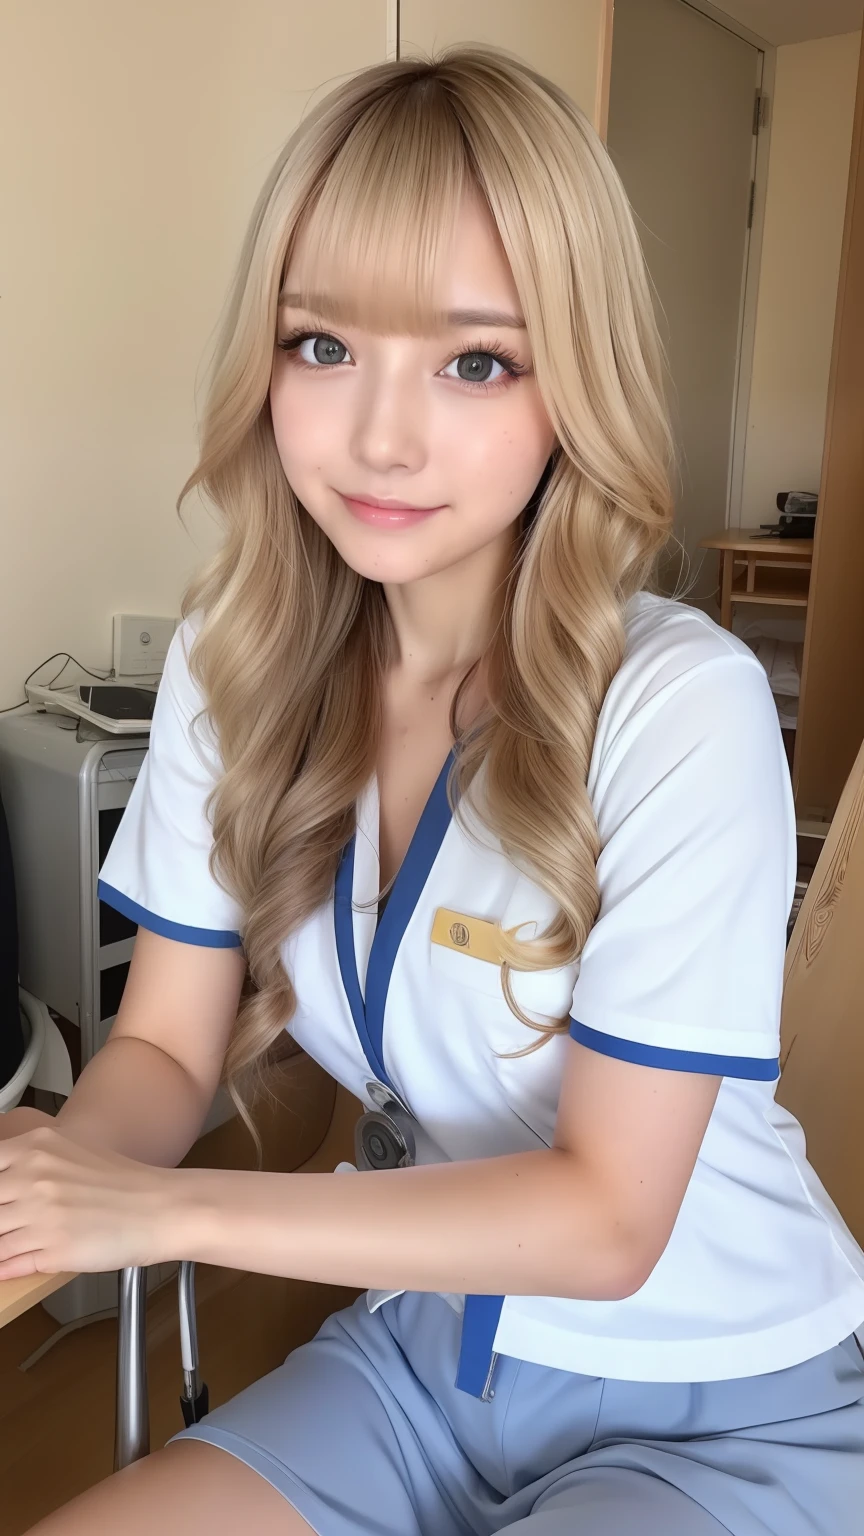 4K、Raw photo、Photoreal Stick、hight resolution、Cute 25 year old woman in Japan , Face like an idol、skin tanned、sun burn、Light blonde medium wavy hair、With bangs、 Cute Real Photo Girl、、Facility Manager、Sitting on a chair in a nursing home office、Looking at the camera